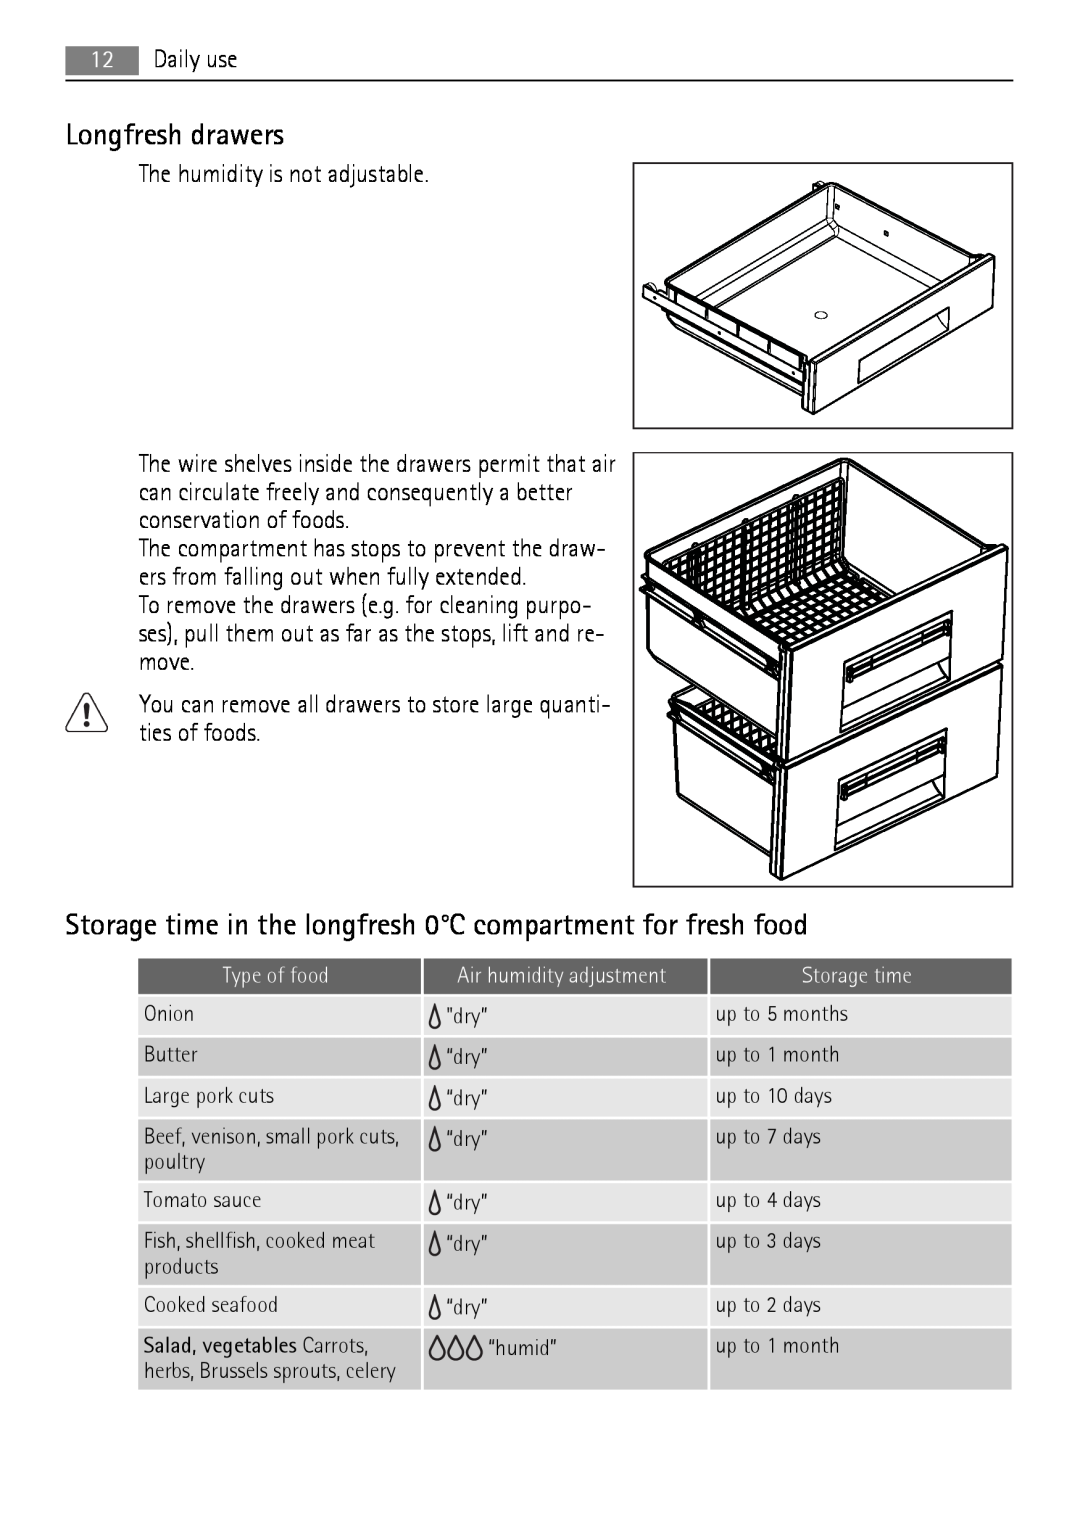 AEG SKZ71800F0 Longfresh drawers, Storage time in the longfresh 0C compartment for fresh food, Daily use, Type of food 